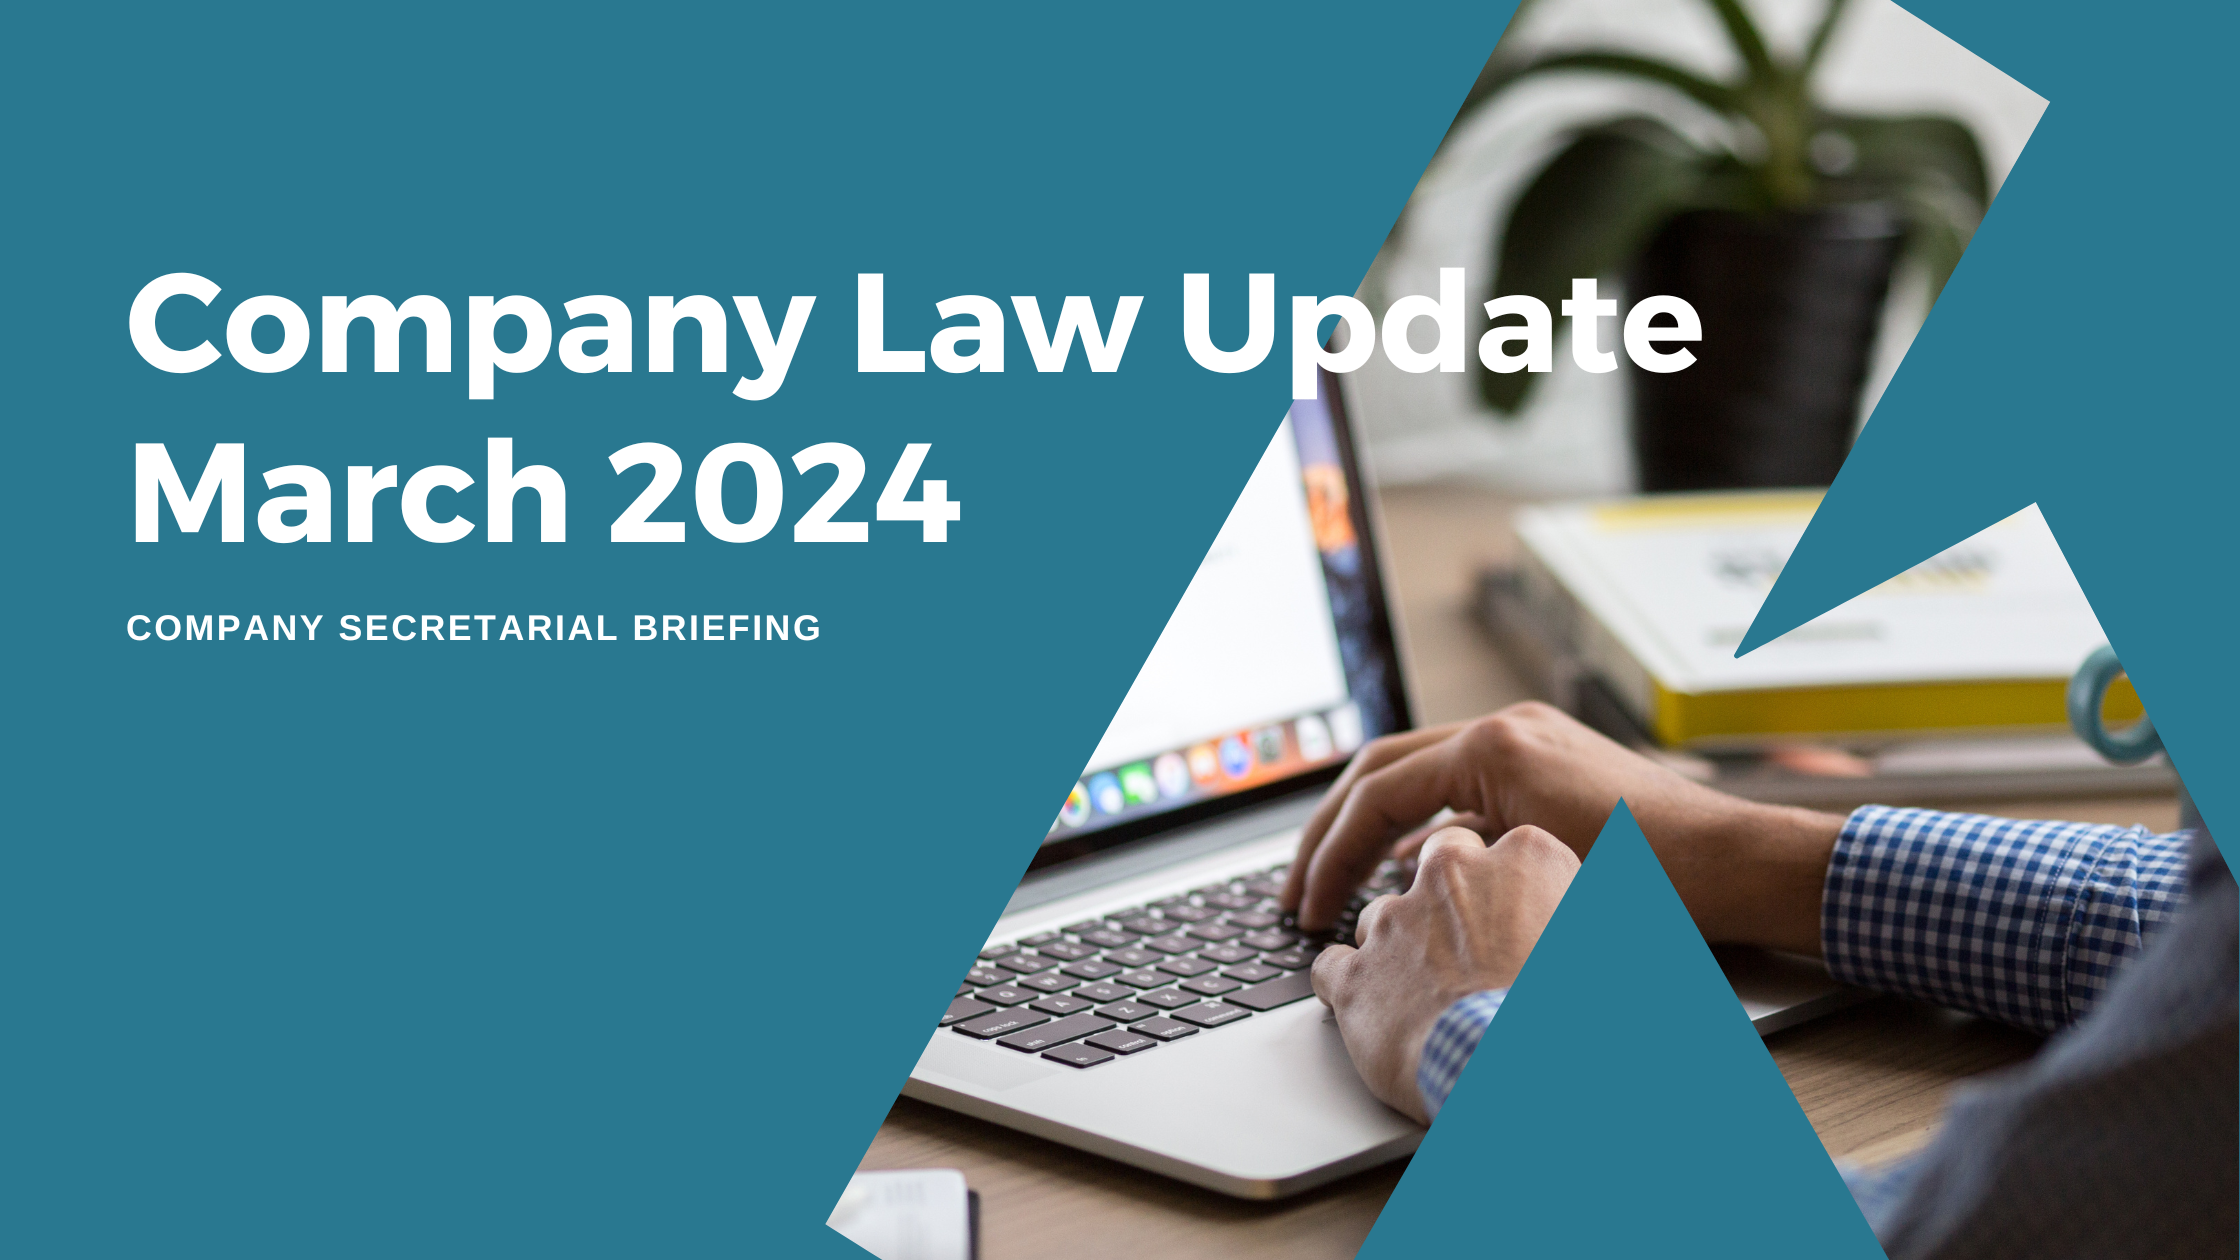 Company Law Update - March 2024